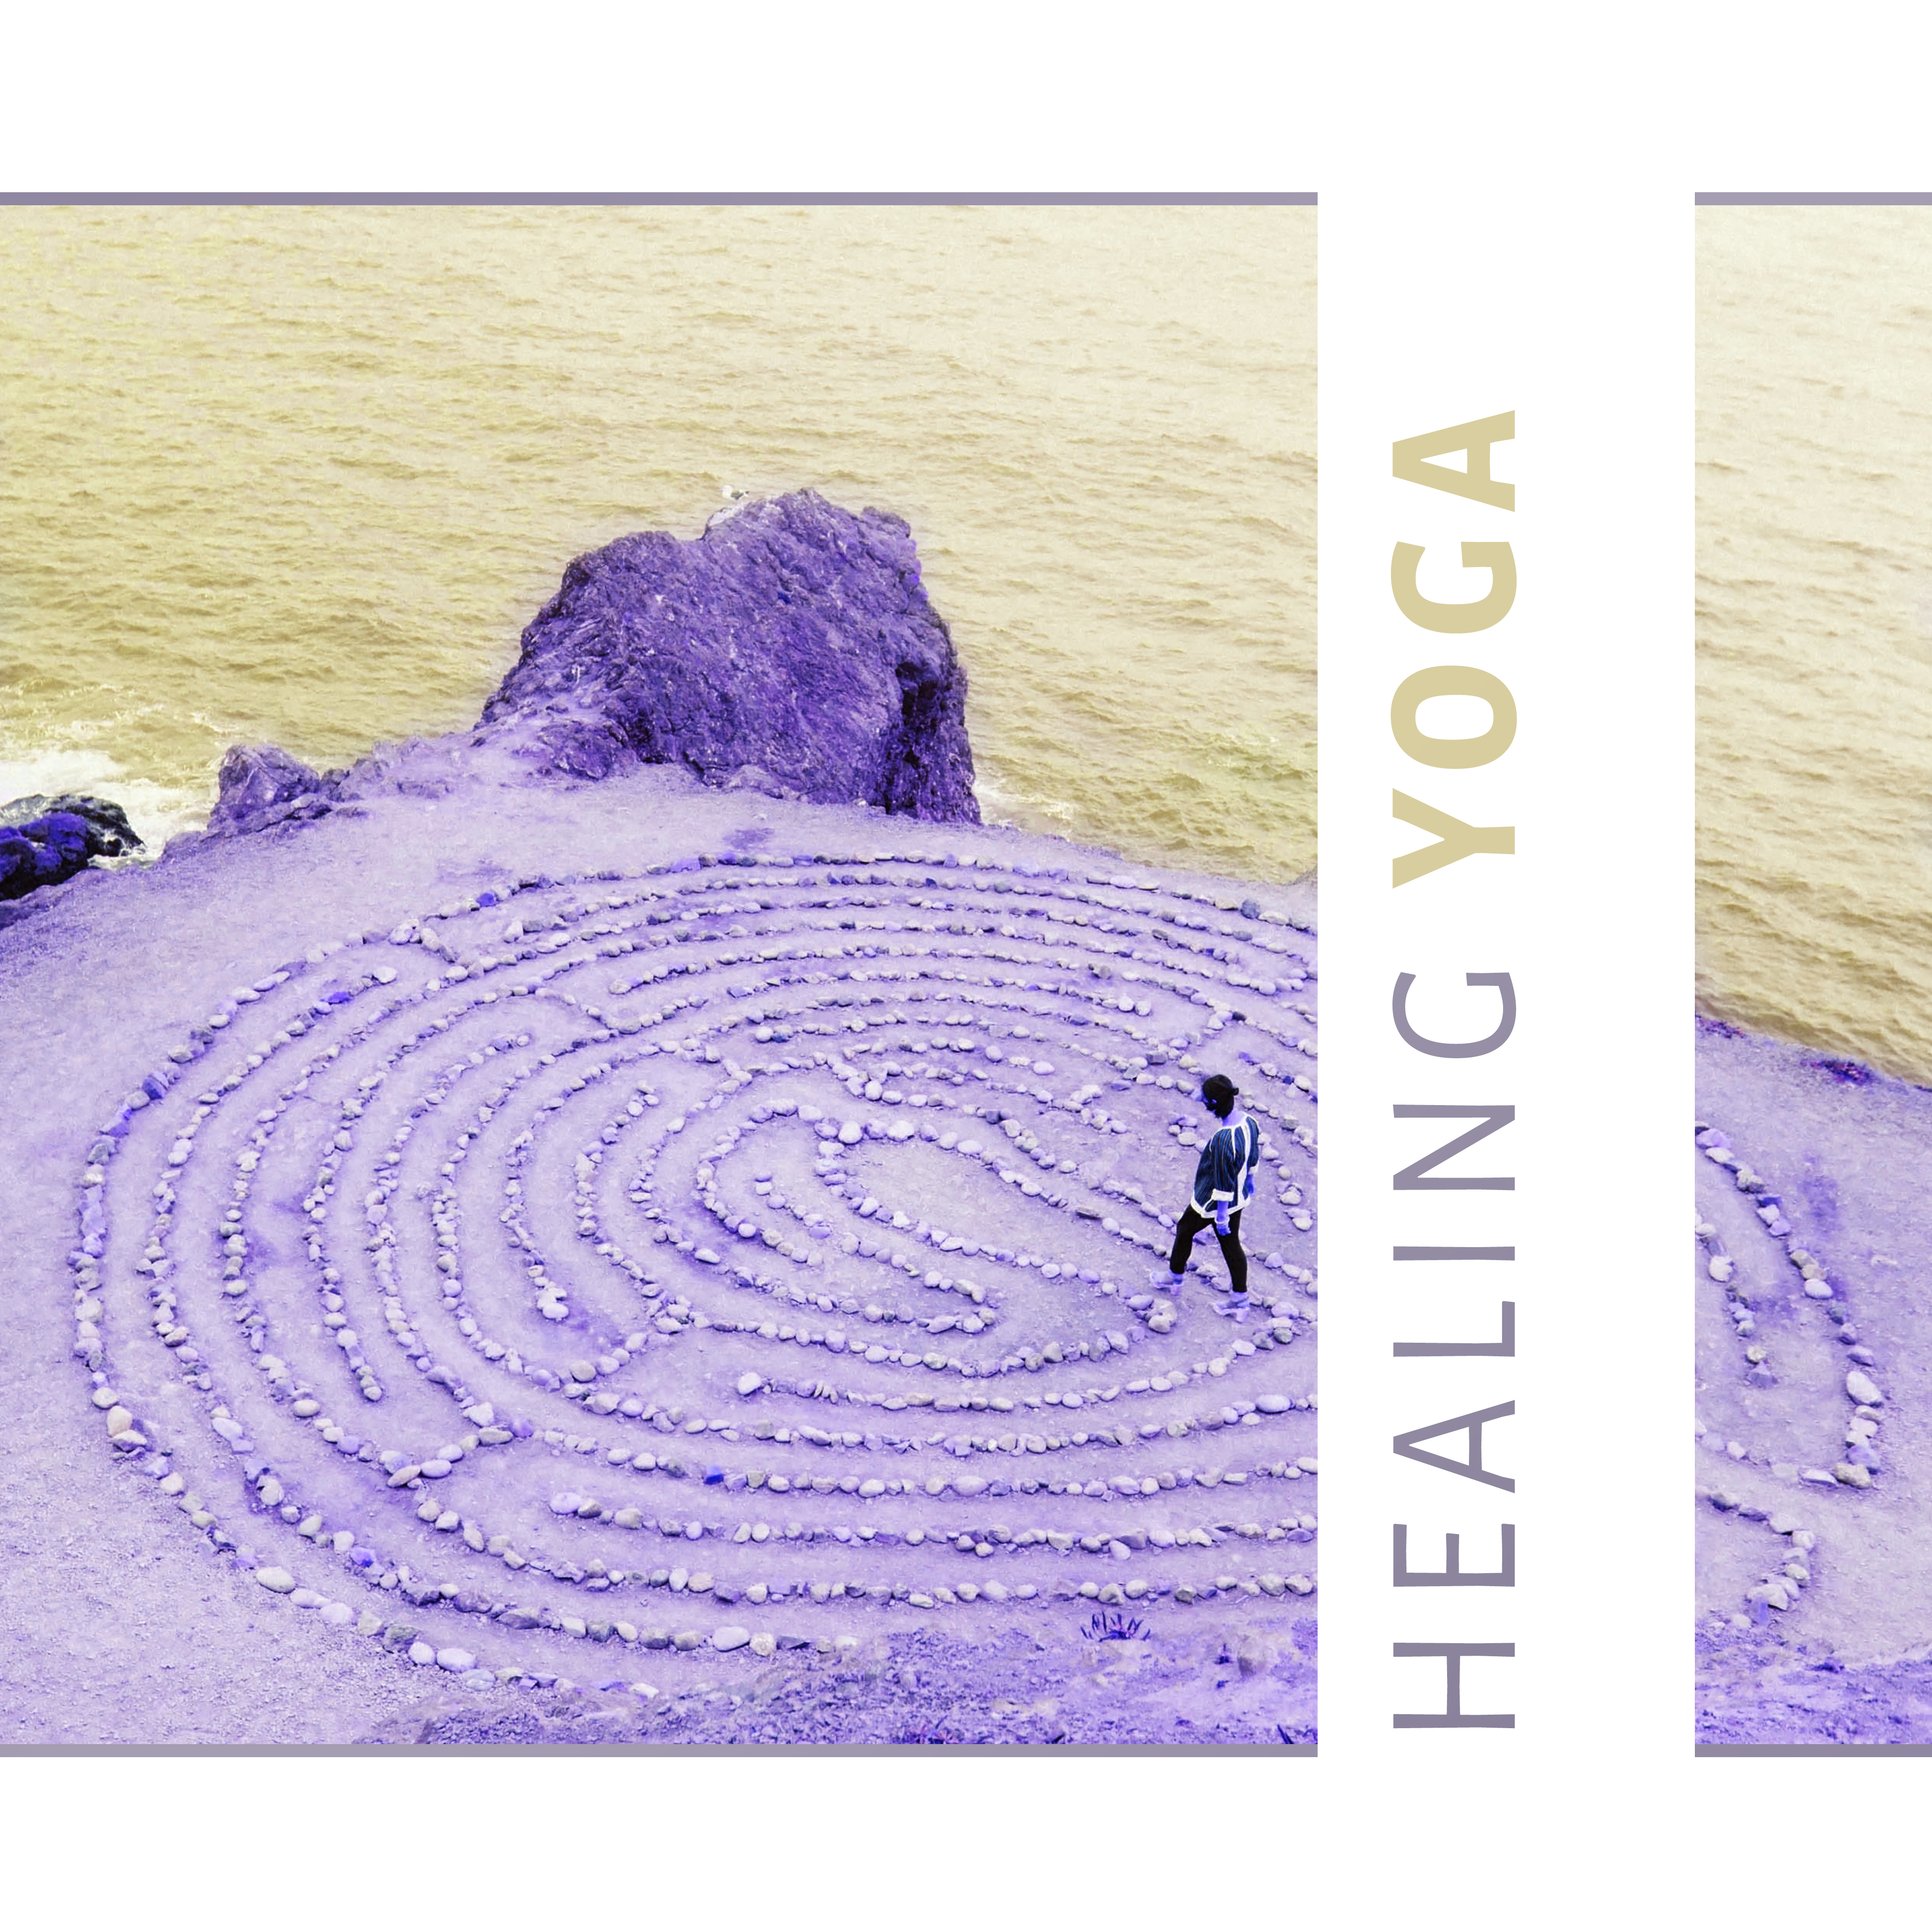 Healing Yoga – New Age Music for Training Poses, Calming Nature Sounds, Bird Sounds for Yoga